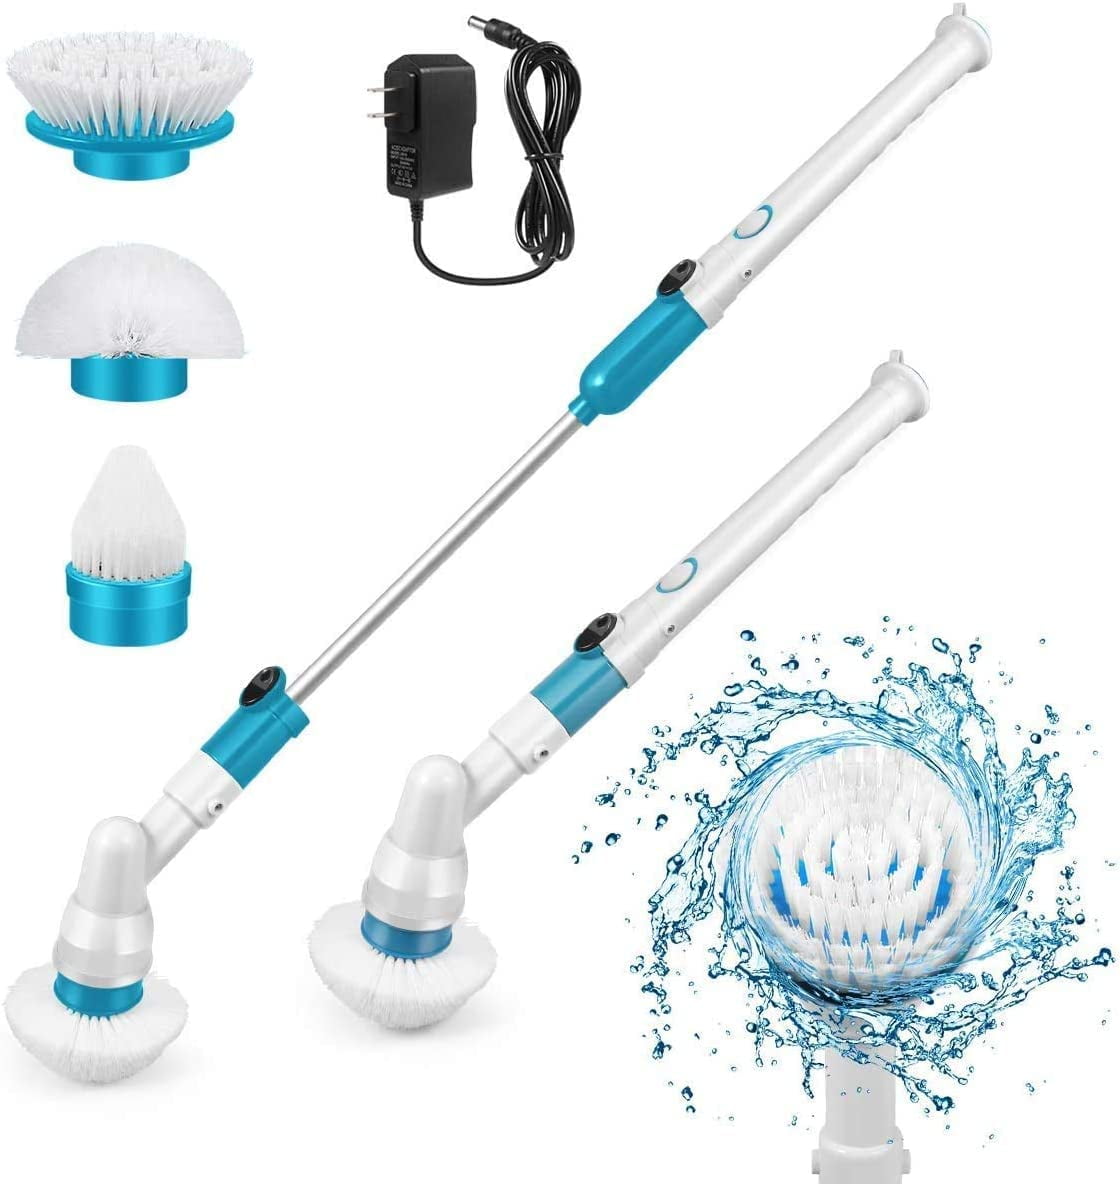  Spin Scrubber, Handheld Spin Scrubber, Cordless Spin Scrubber,  Rechargeable Spinning Brush for Dish Wash - Multifunctional Scrub Brush  with 2 Gears and Battery Display, Household Cleaning Supplies : Health &  Household